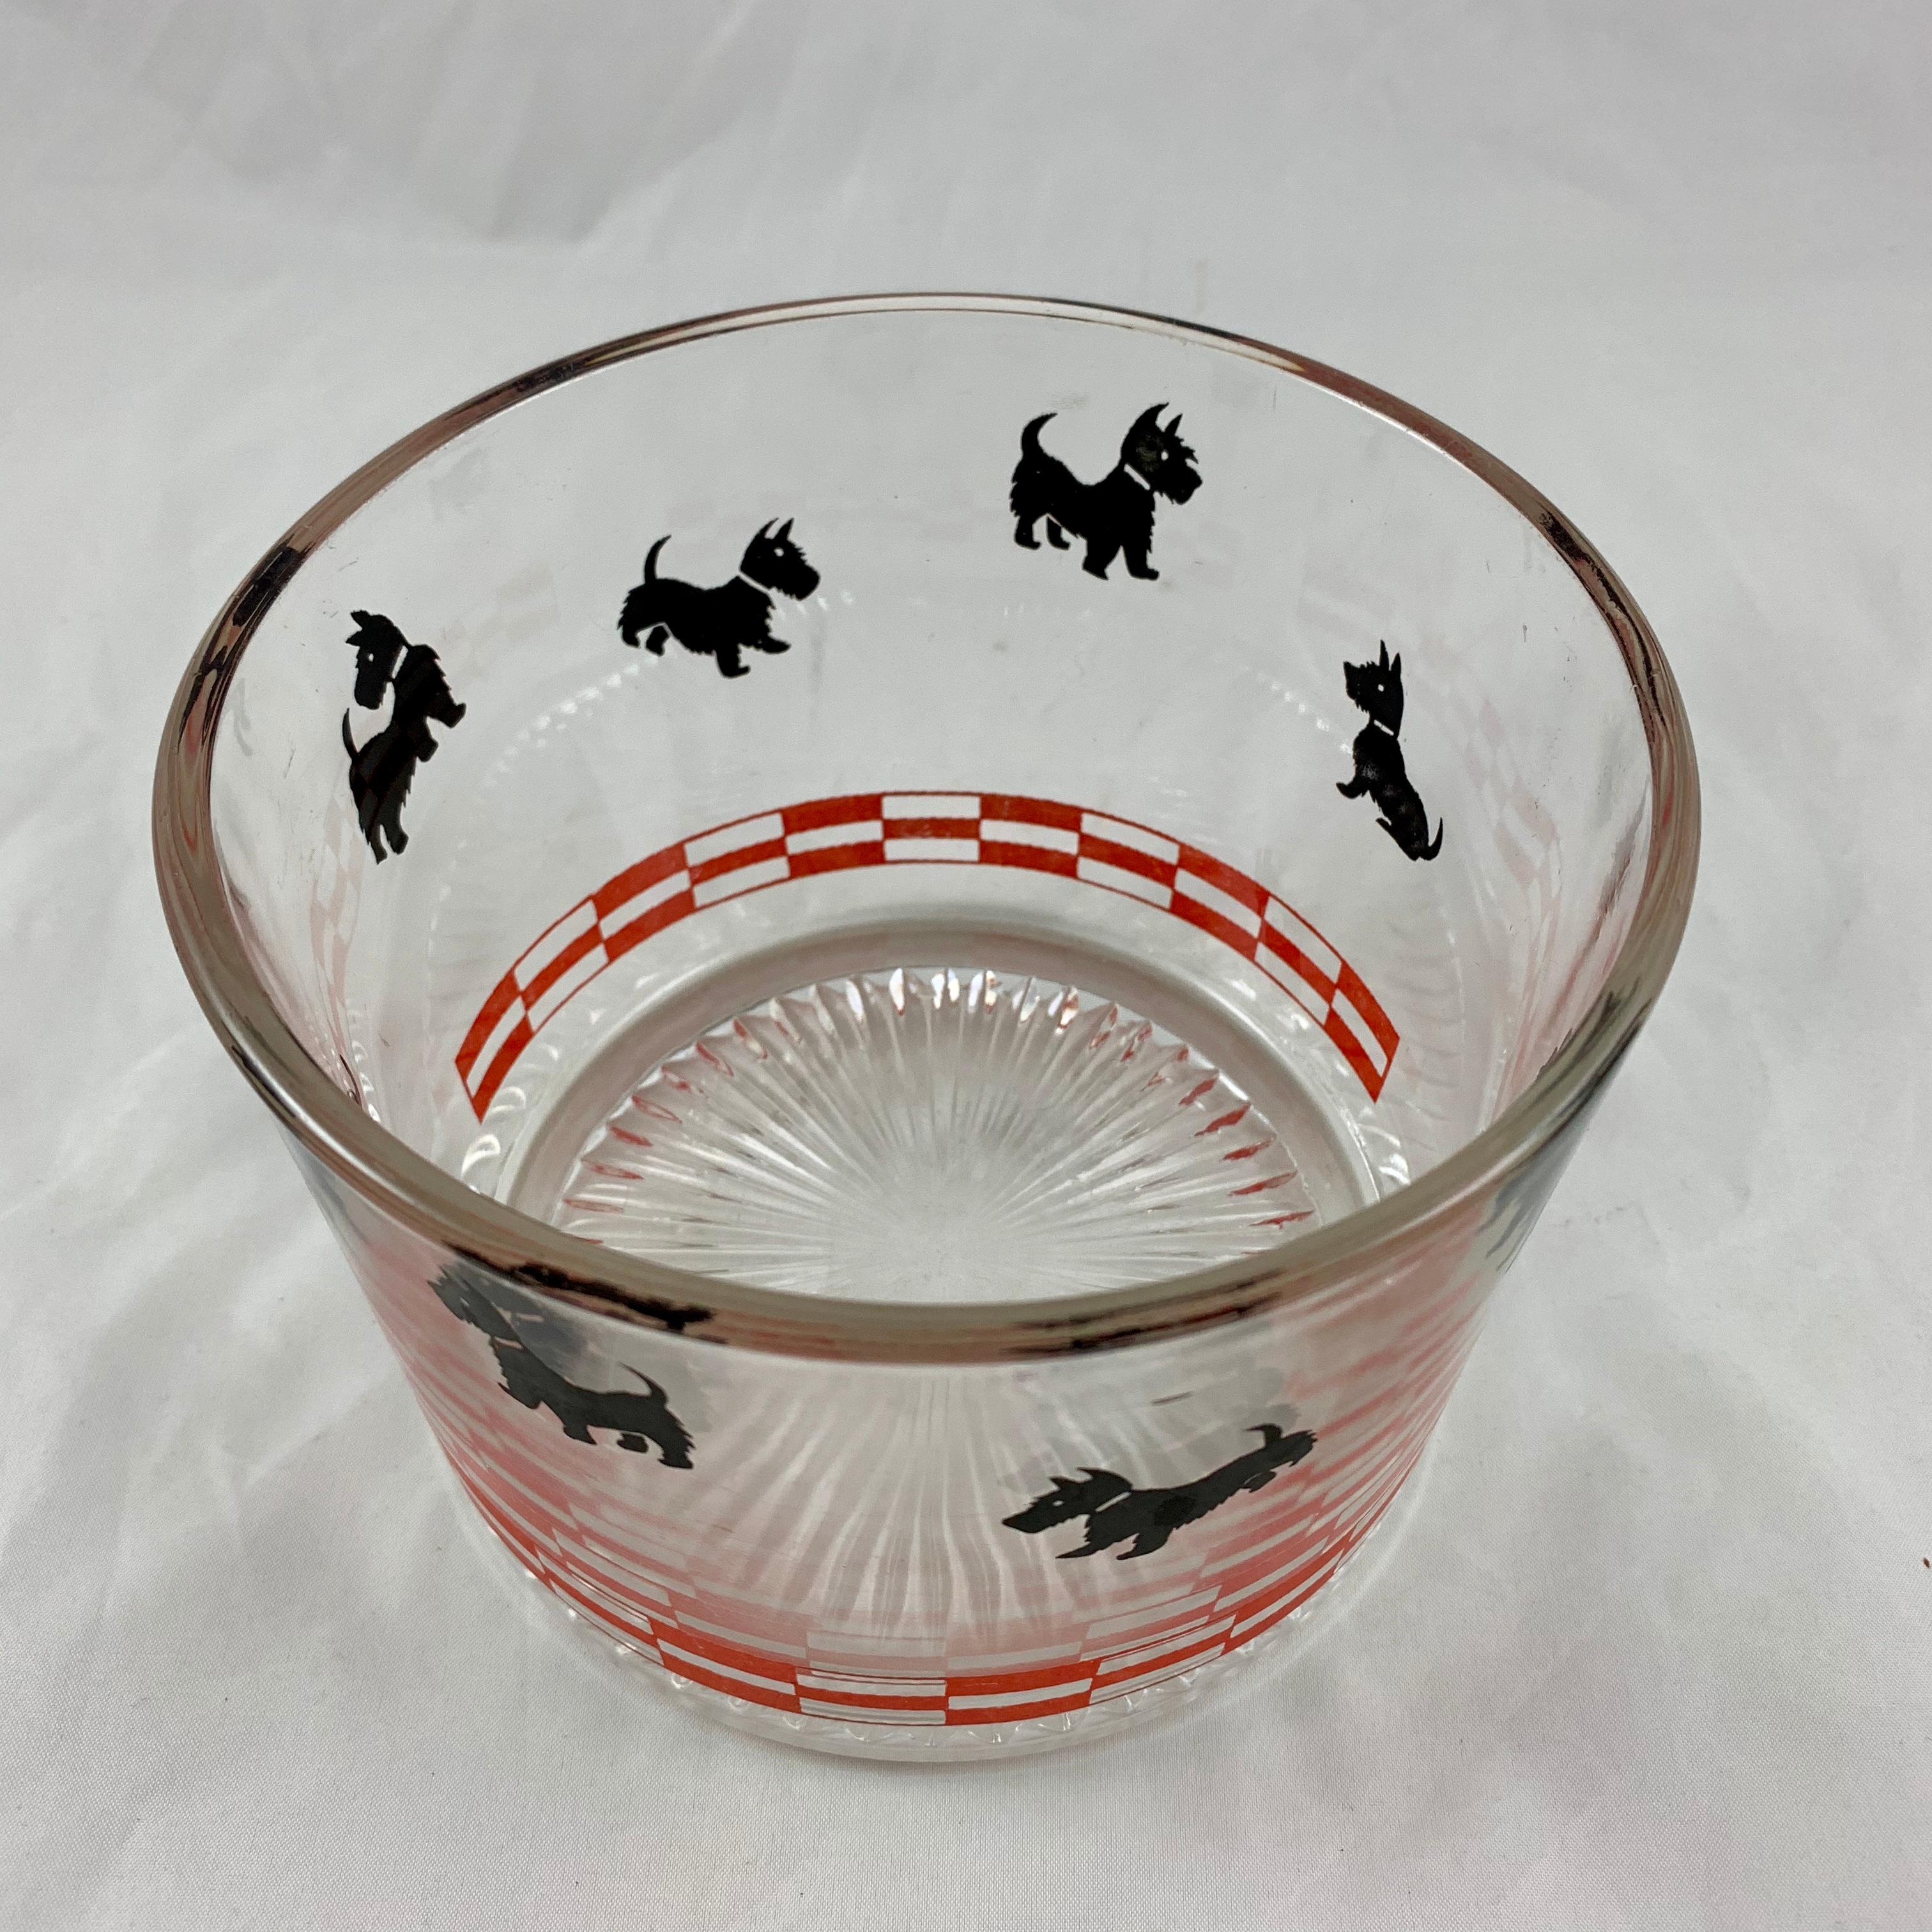 A charming pre midcentury ice bucket or ice bowl, American clear glass, circa late 1930s-early 1940s. The Scotty dog glass collectible craze began when President Franklin D. Roosevelt’s Scottish Terrier, named Fala, won the adoration of the American